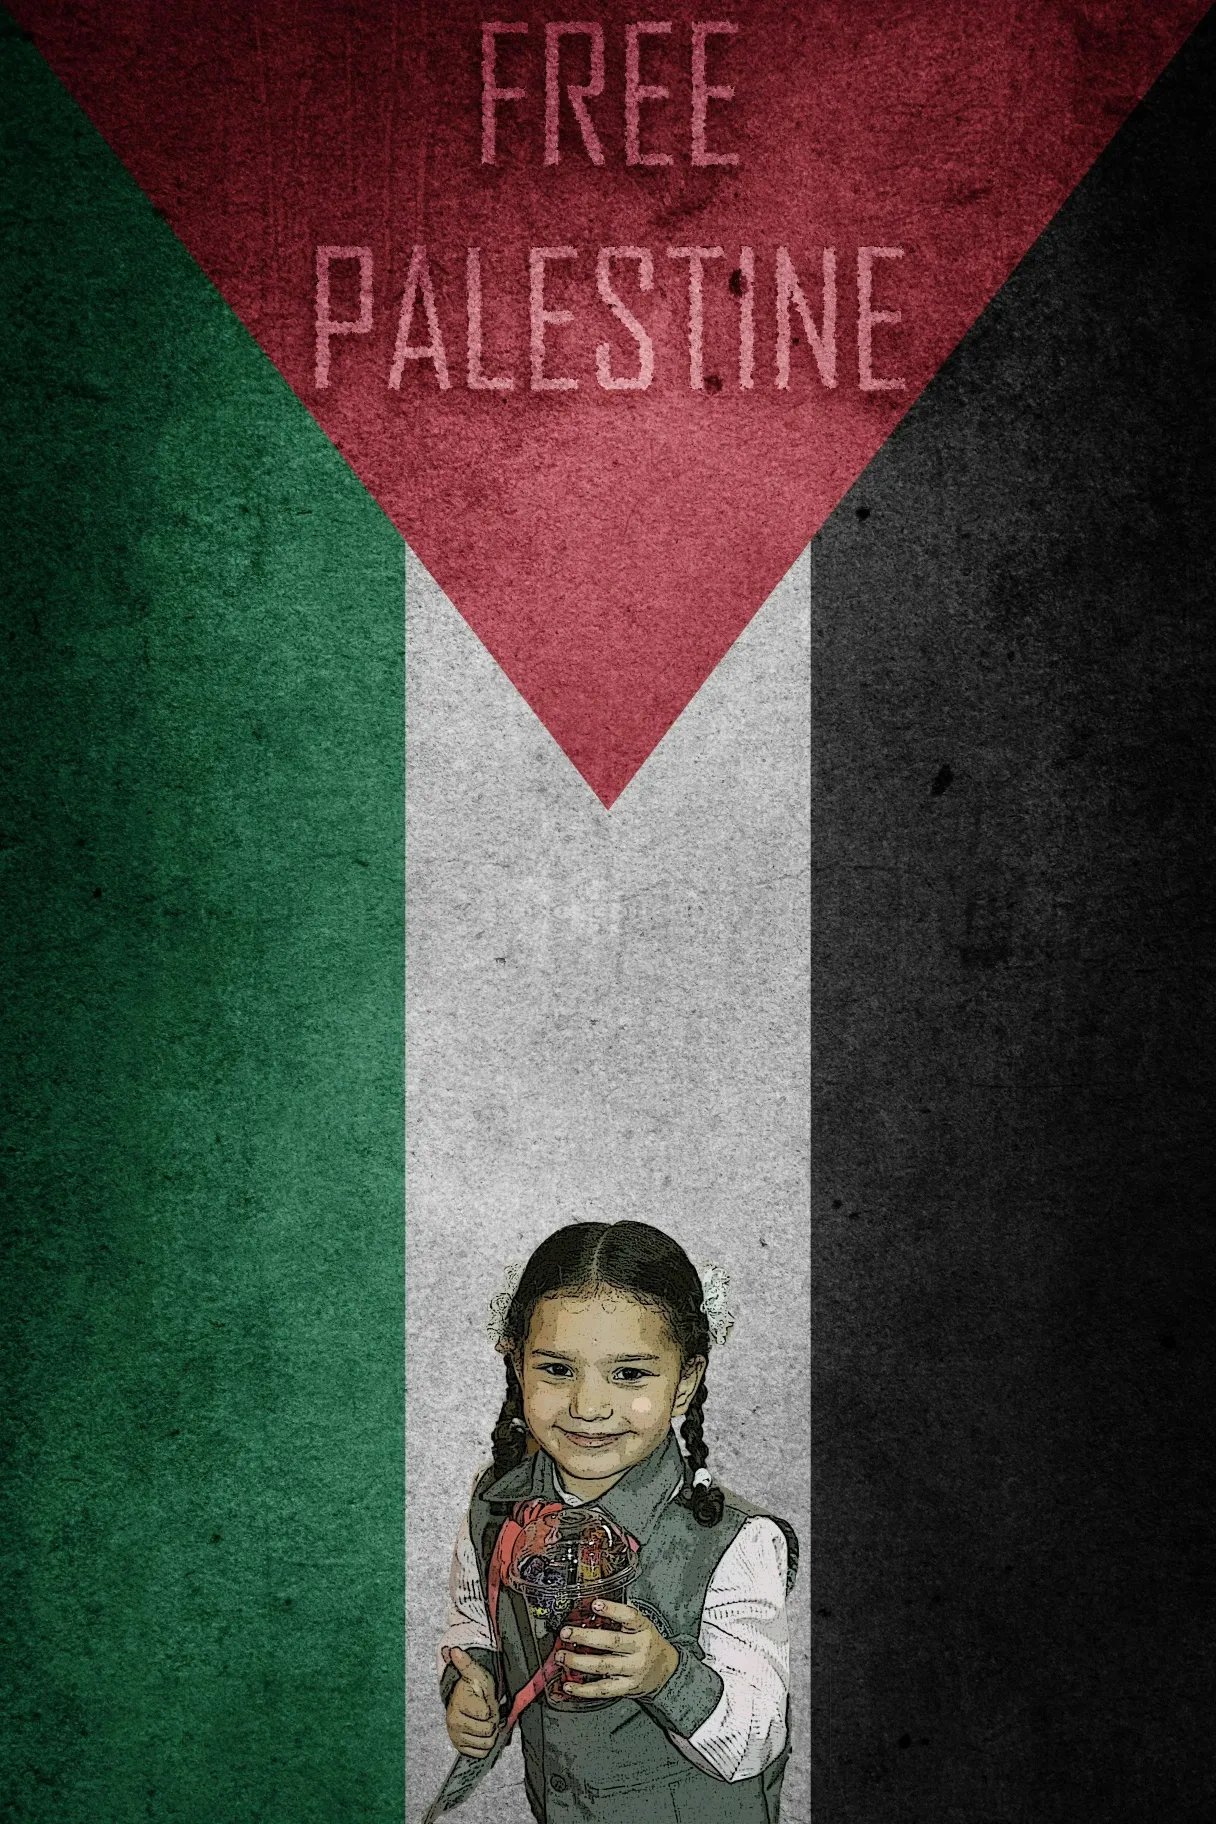 thumb for Cool Free Palestine Wallpaper